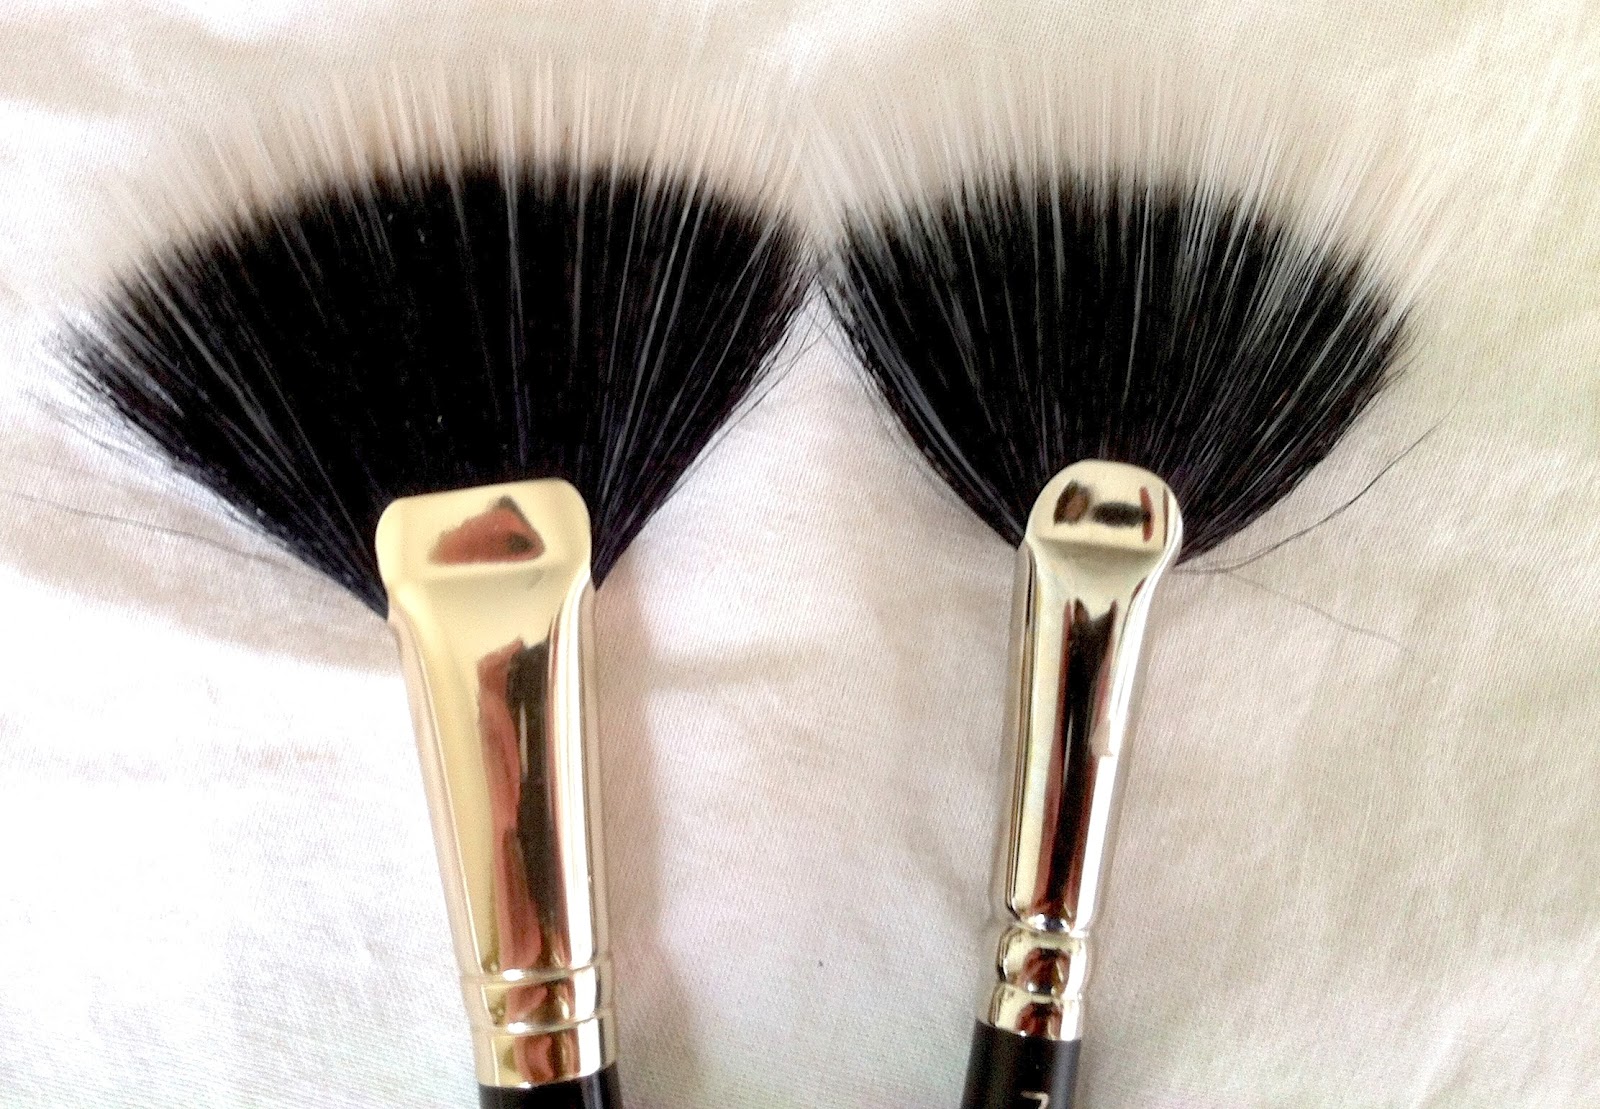 Make Up For Dolls: Fan Brushes I'm a fan of